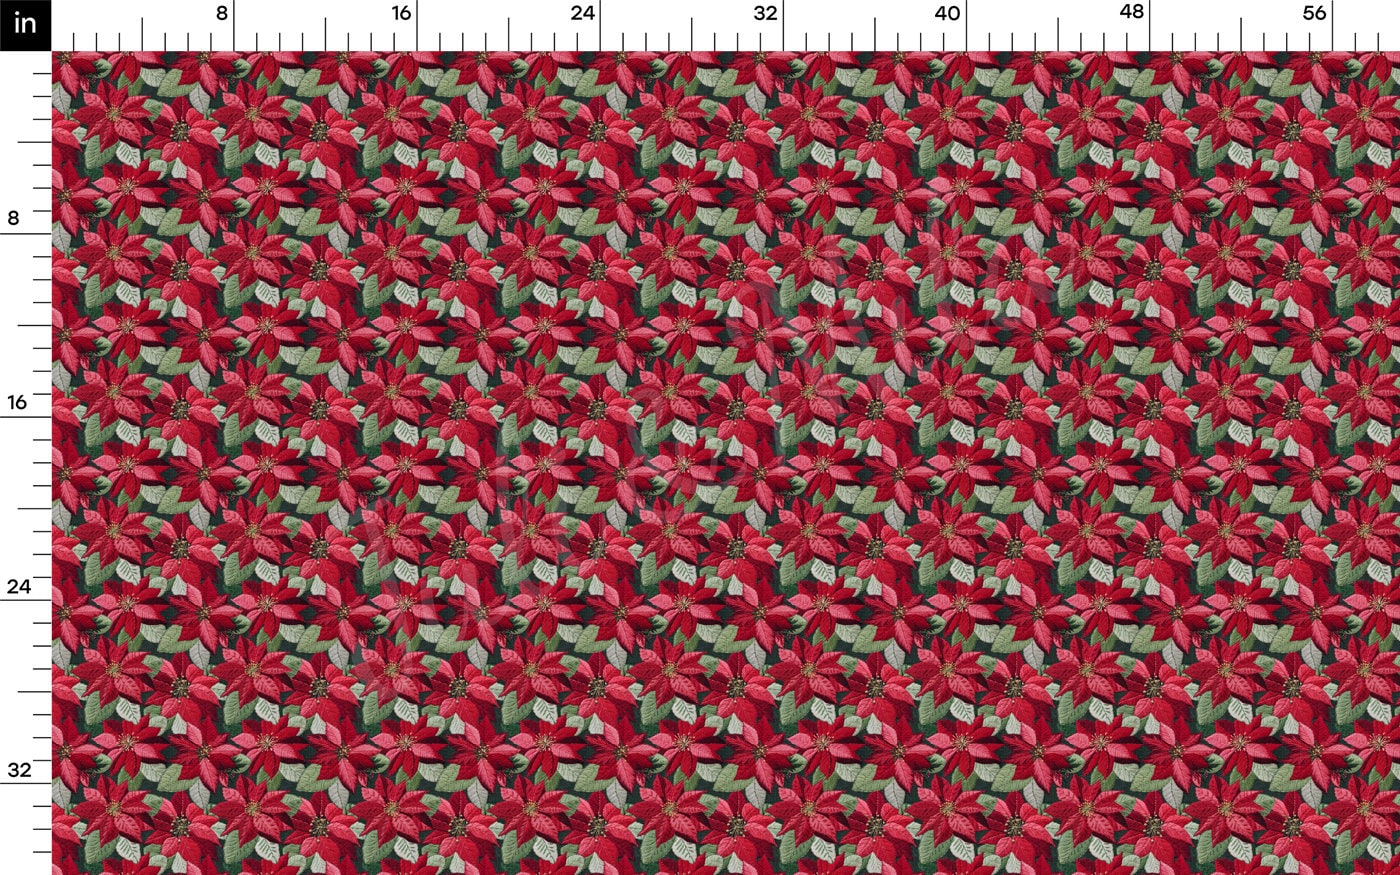 Christmas DBP Fabric Double Brushed Polyester Fabric by the Yard DBP Jersey Stretchy Soft Polyester Stretch Fabric DBP1977